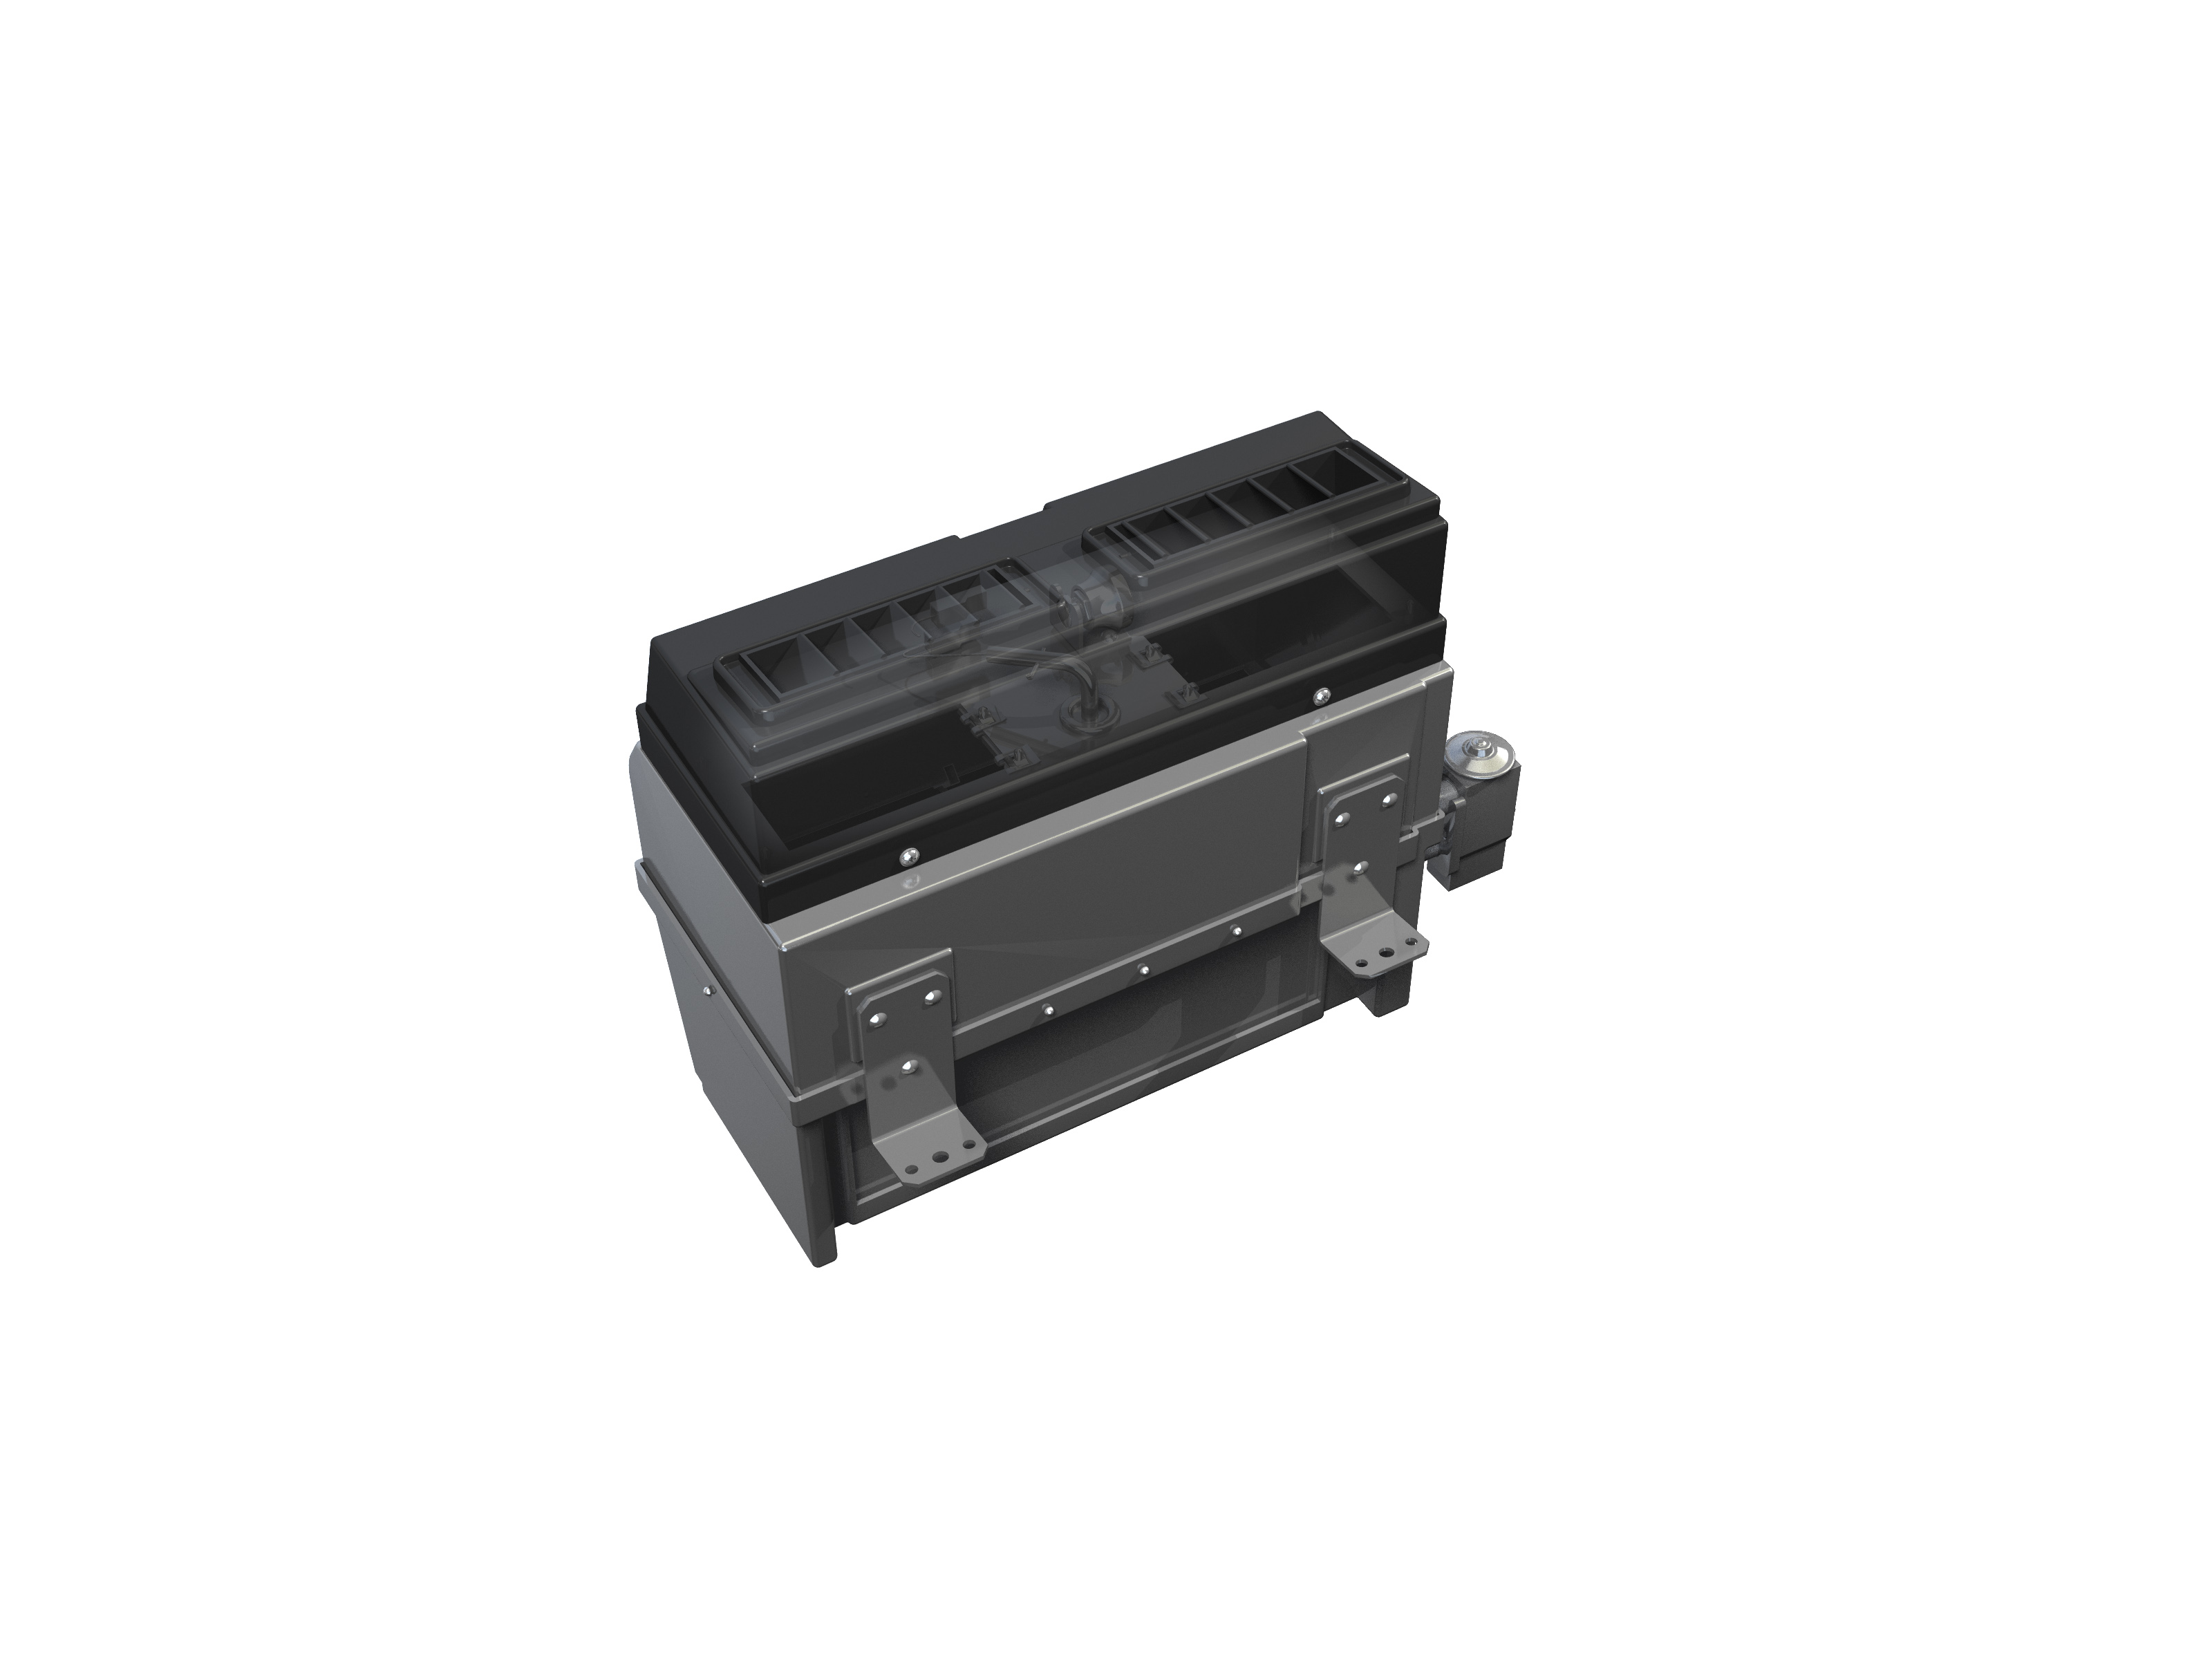 The Polar Cab ES can be installed with one of two different aftermarket kit configurations.